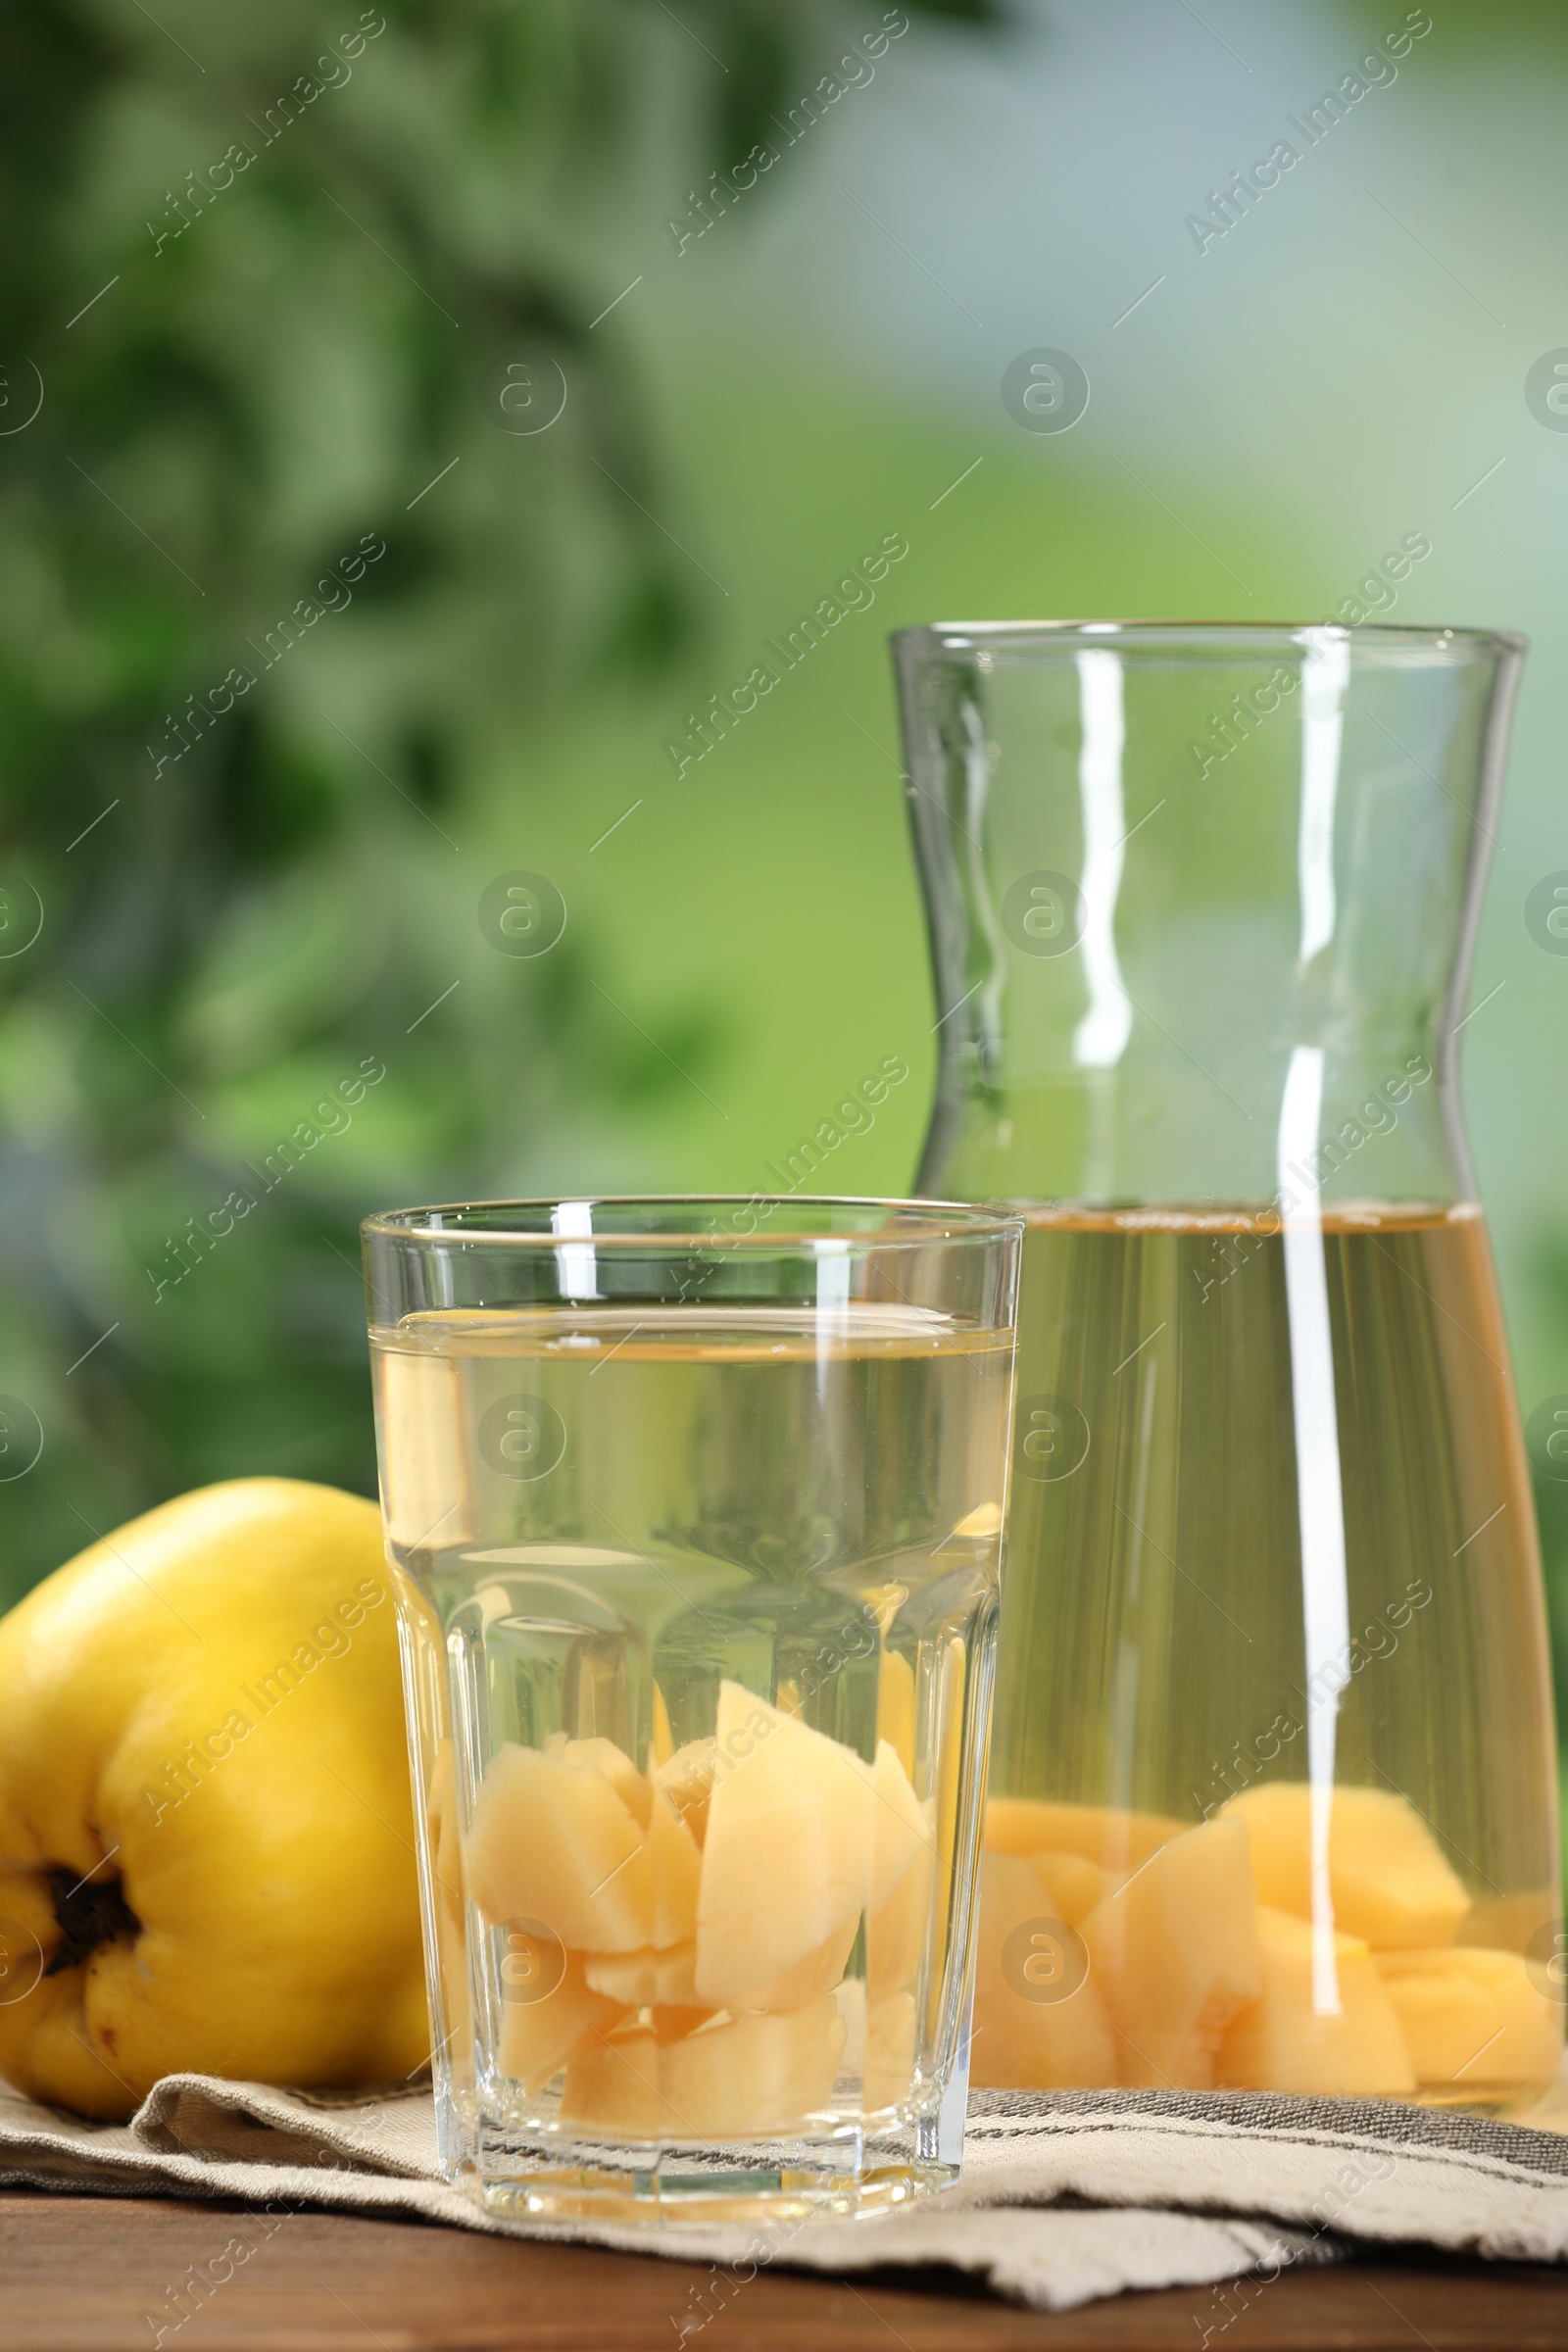 Photo of Delicious quince drink and fresh fruits on wooden table against blurred background